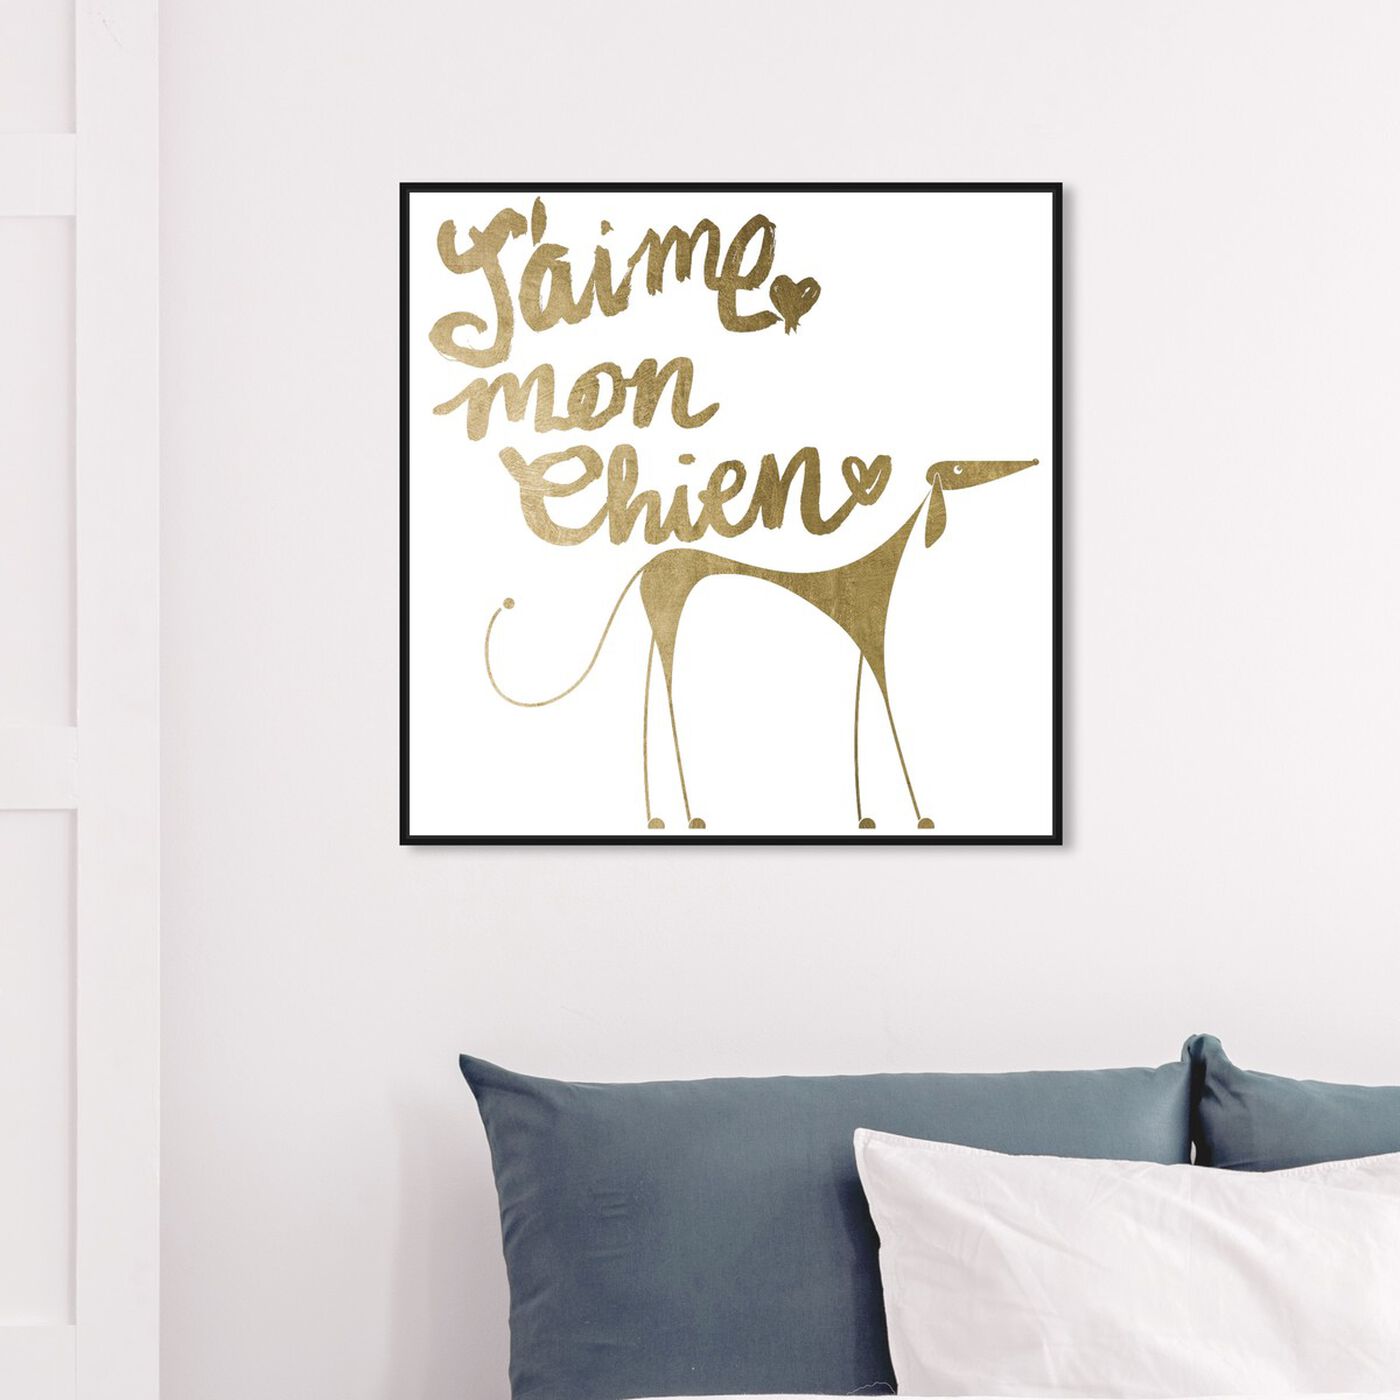 Hanging view of Mon Chien featuring typography and quotes and love quotes and sayings art.